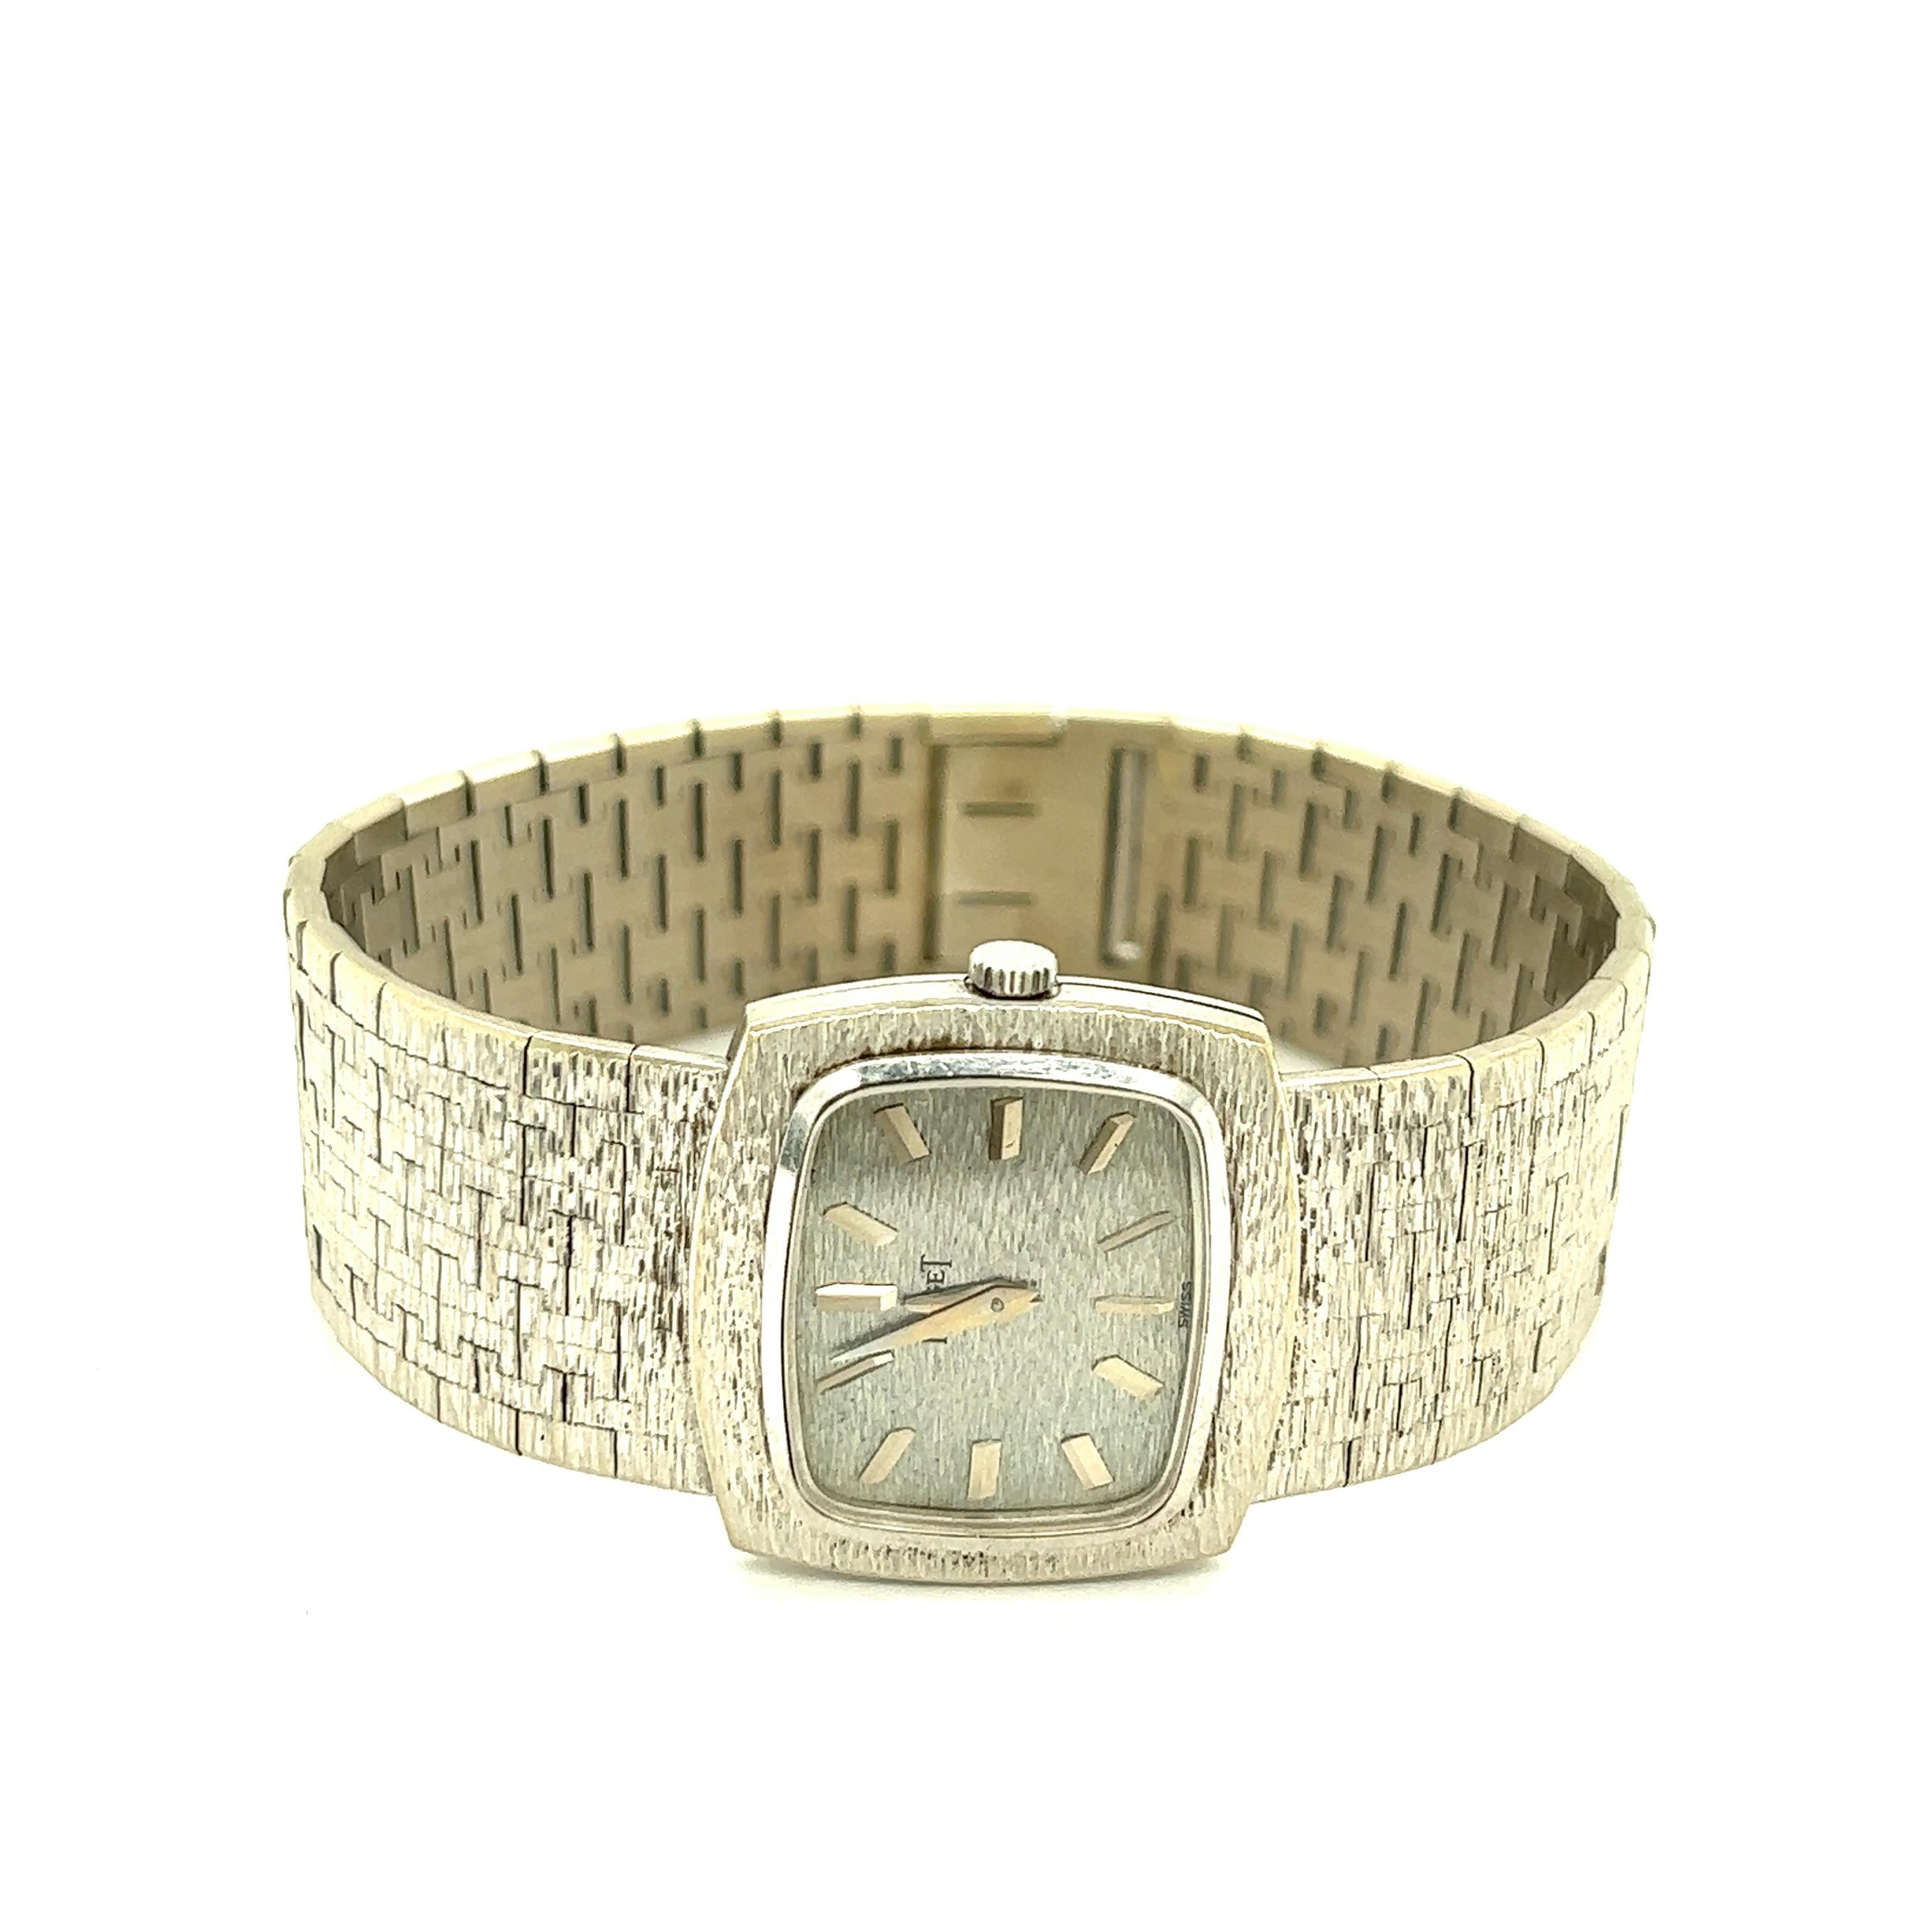 Piaget 18k White Gold Lady's Wristwatch

Rectangular shaped case with rounded corners, 18 karat white gold, with the classic Piaget surface finish on the straps, mechanical movement; marked Piaget, reference no. 9561A6, serial no. 199022, 750,